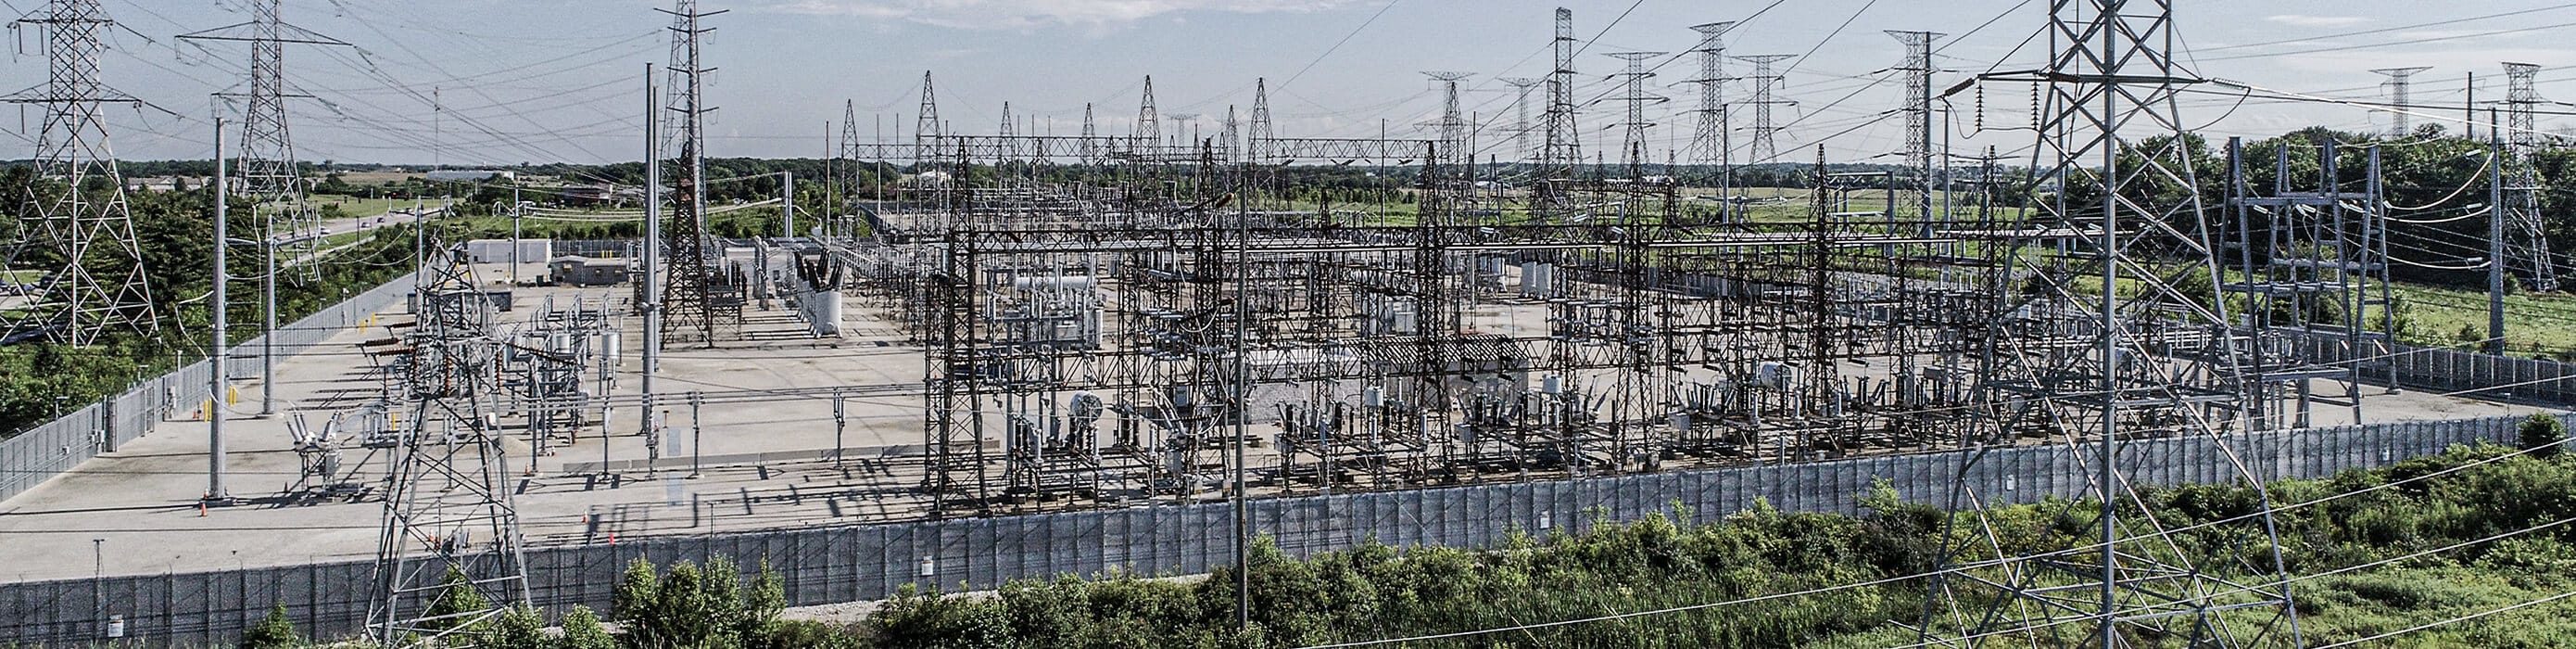 A large substation with electric wires above it.